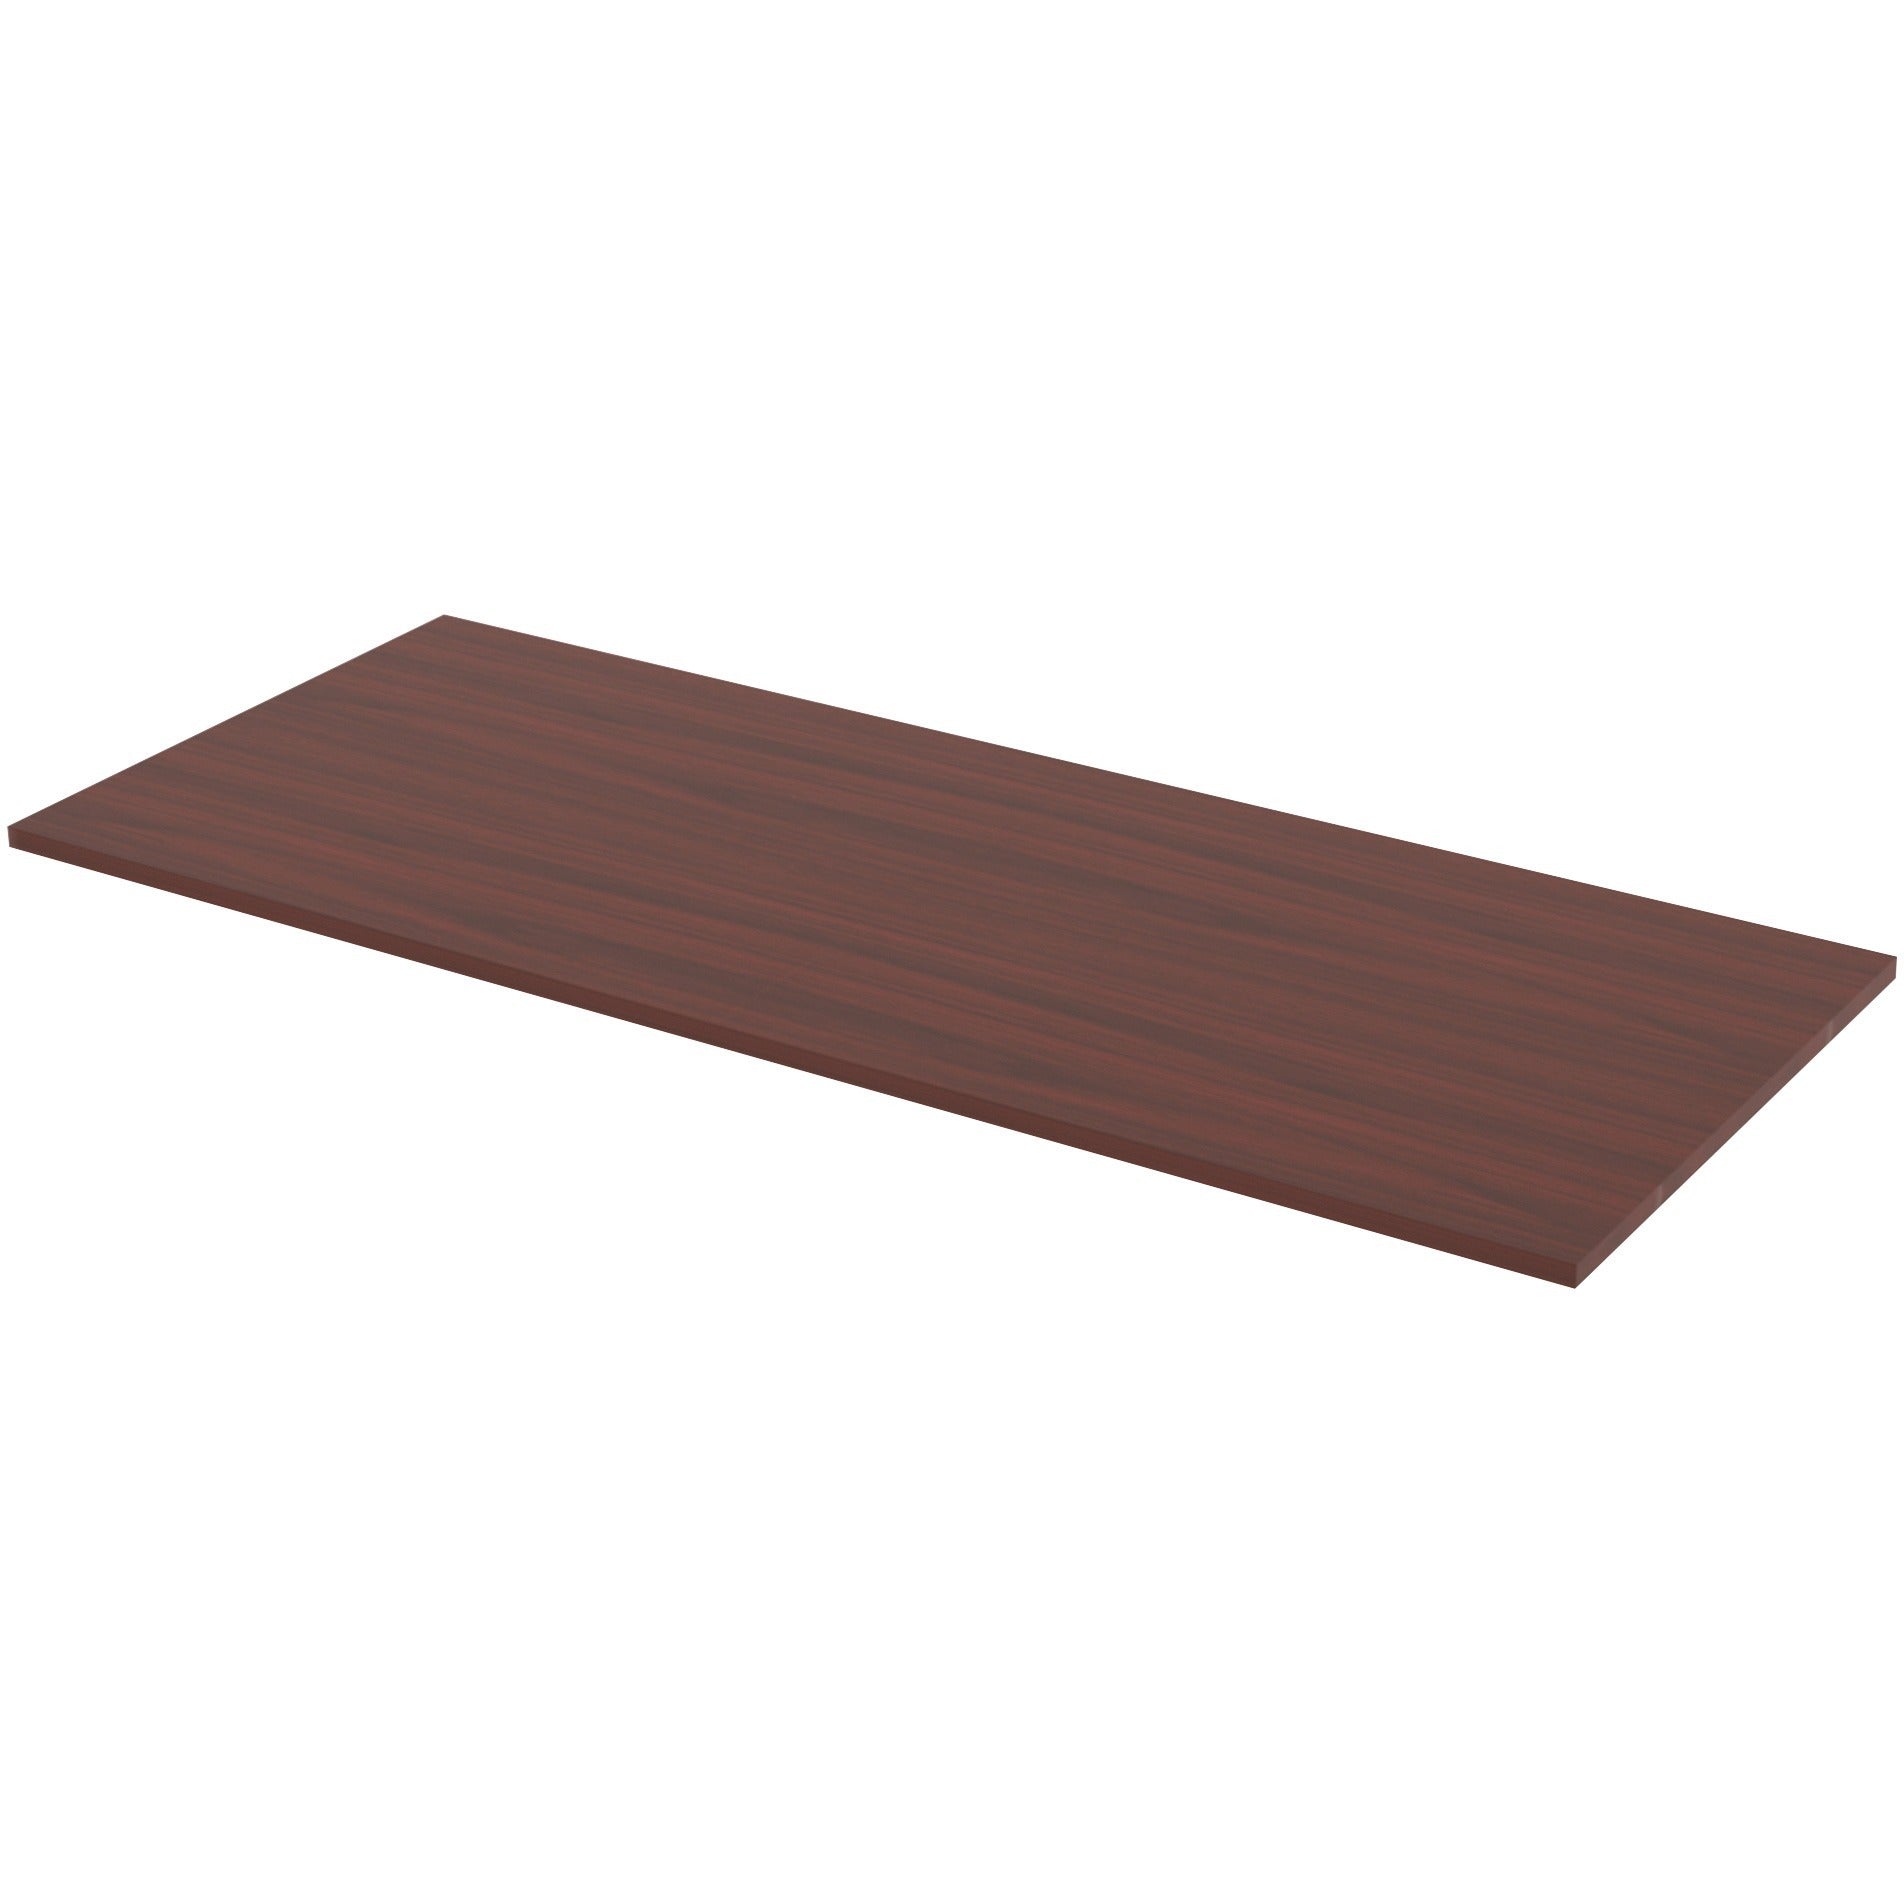 Lorell Relevance Series Tabletop - For - Table TopLaminated Rectangle, Mahogany Top x 72" Table Top Width x 24" Table Top Depth x 1" Table Top Thickness x 71.63" Width x 23.63" Depth - 1 Each - 